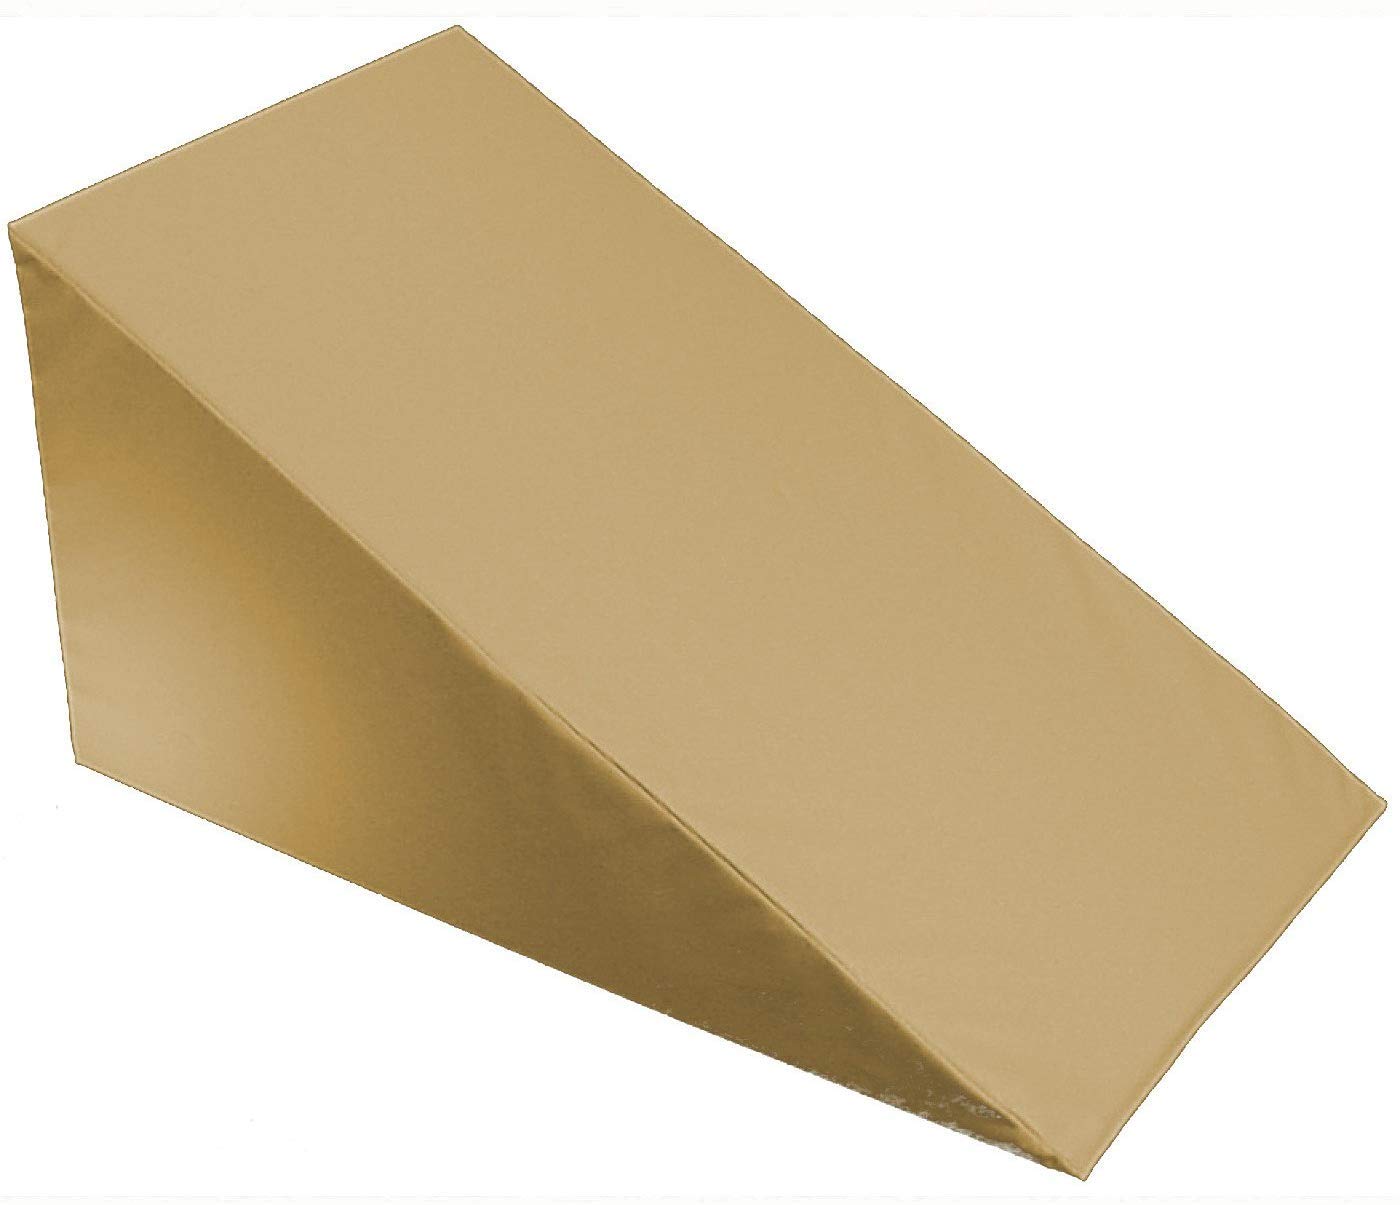 Foam Bed Wedge Replacement Cover - Multiple Sizes